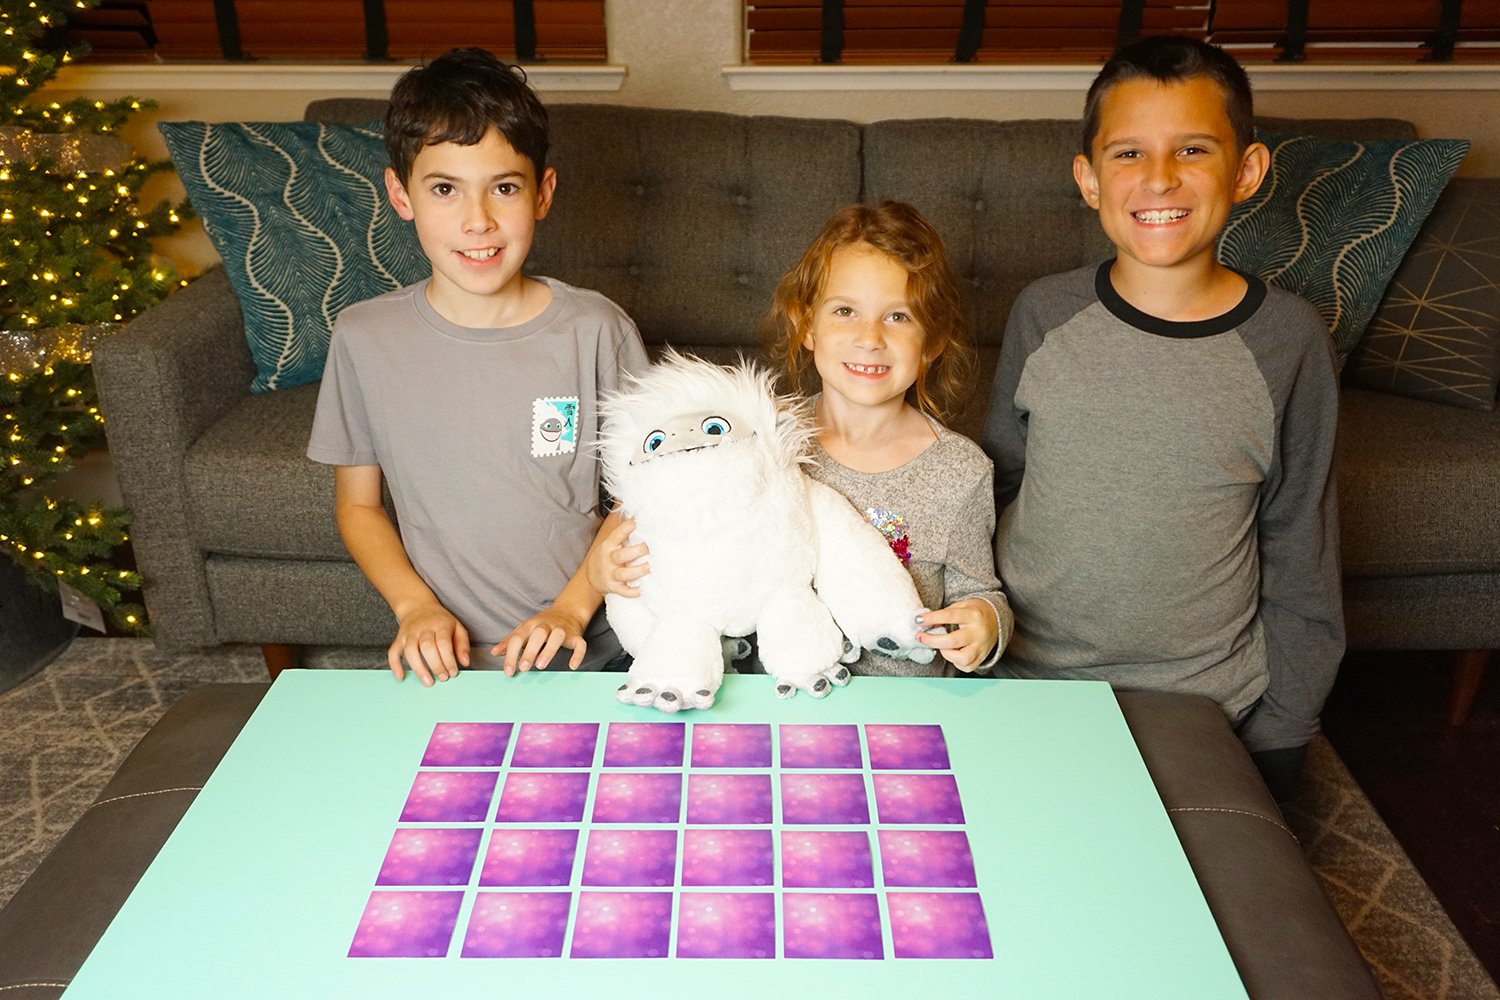 kids smiling with abominable toy ready to play game